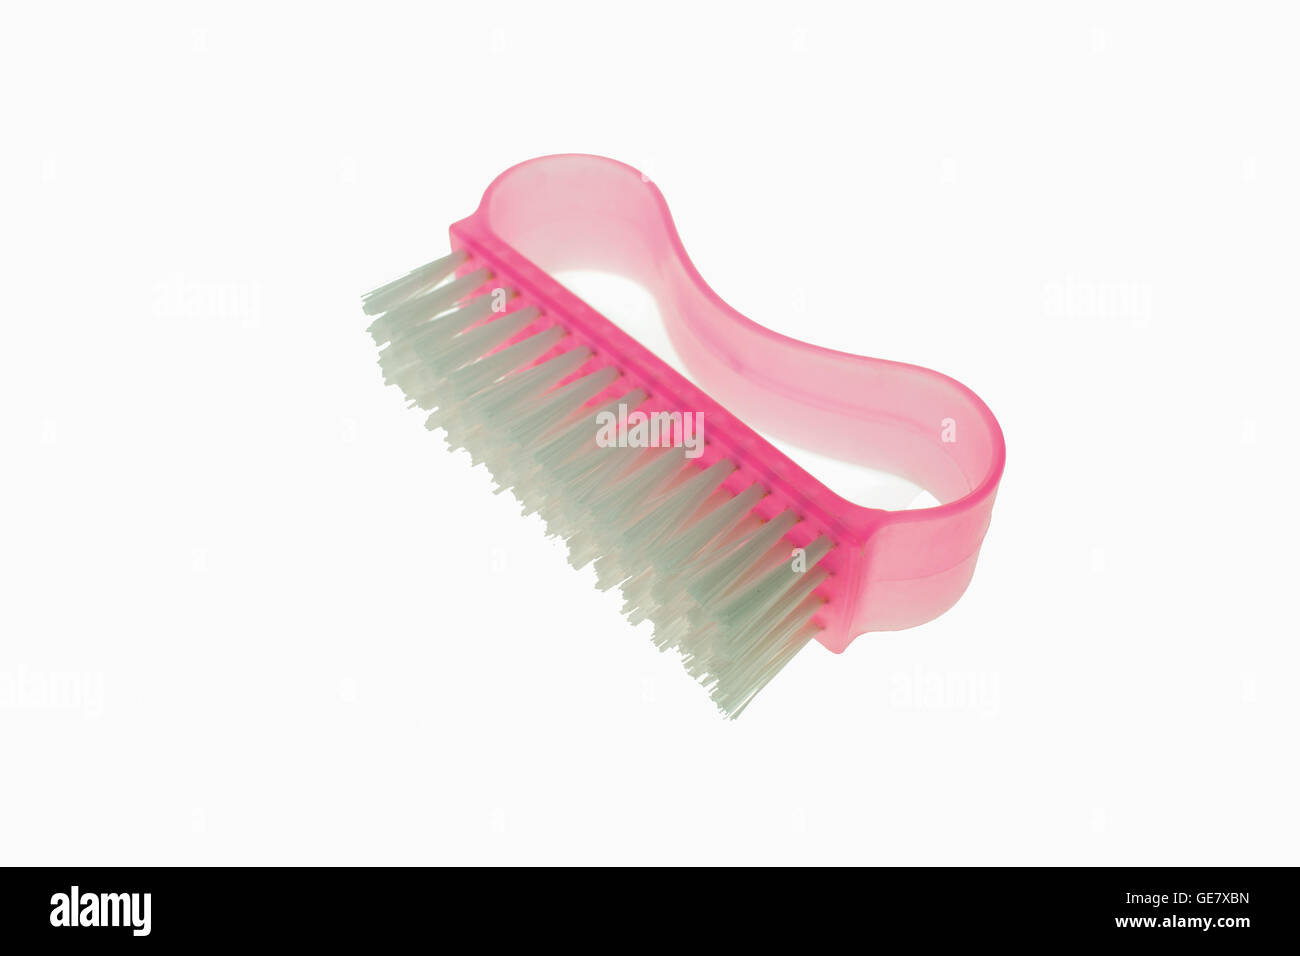 pink clothes brush, on white background Stock Photo